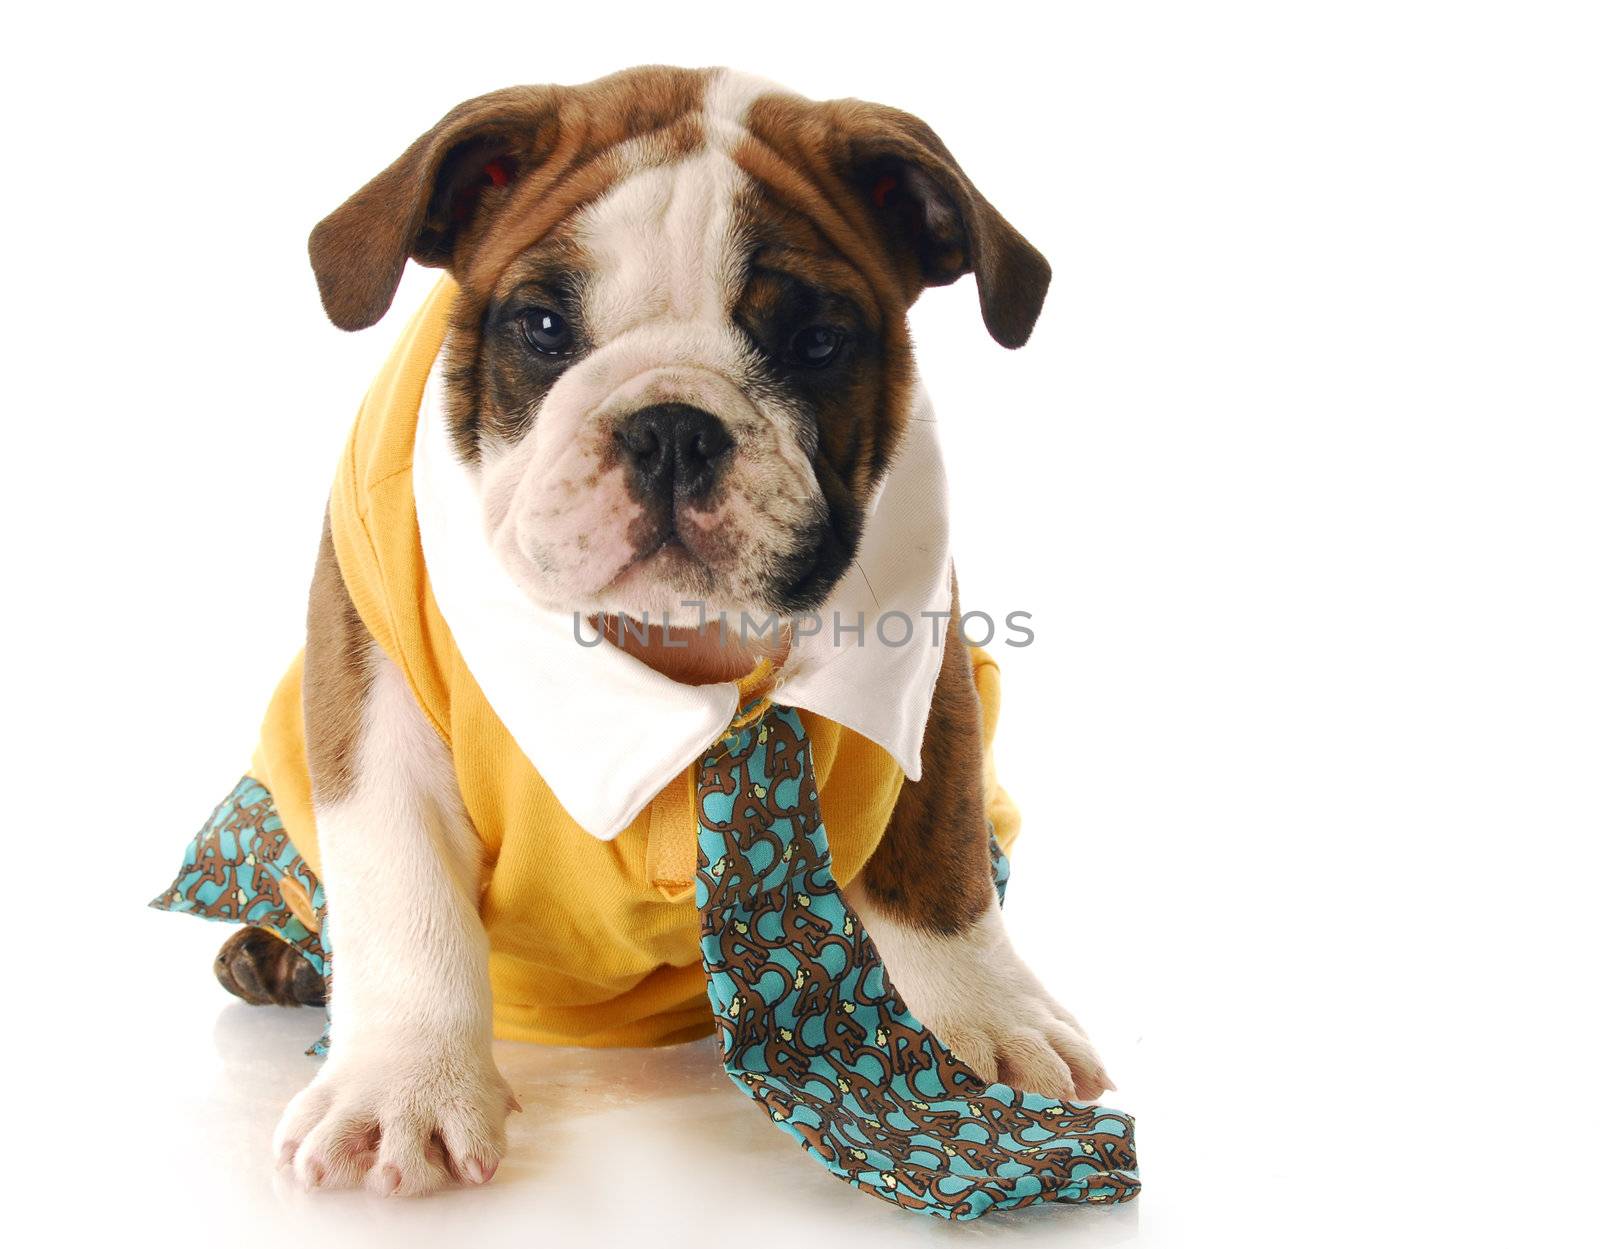 puppy dressed up with shirt and tie by willeecole123